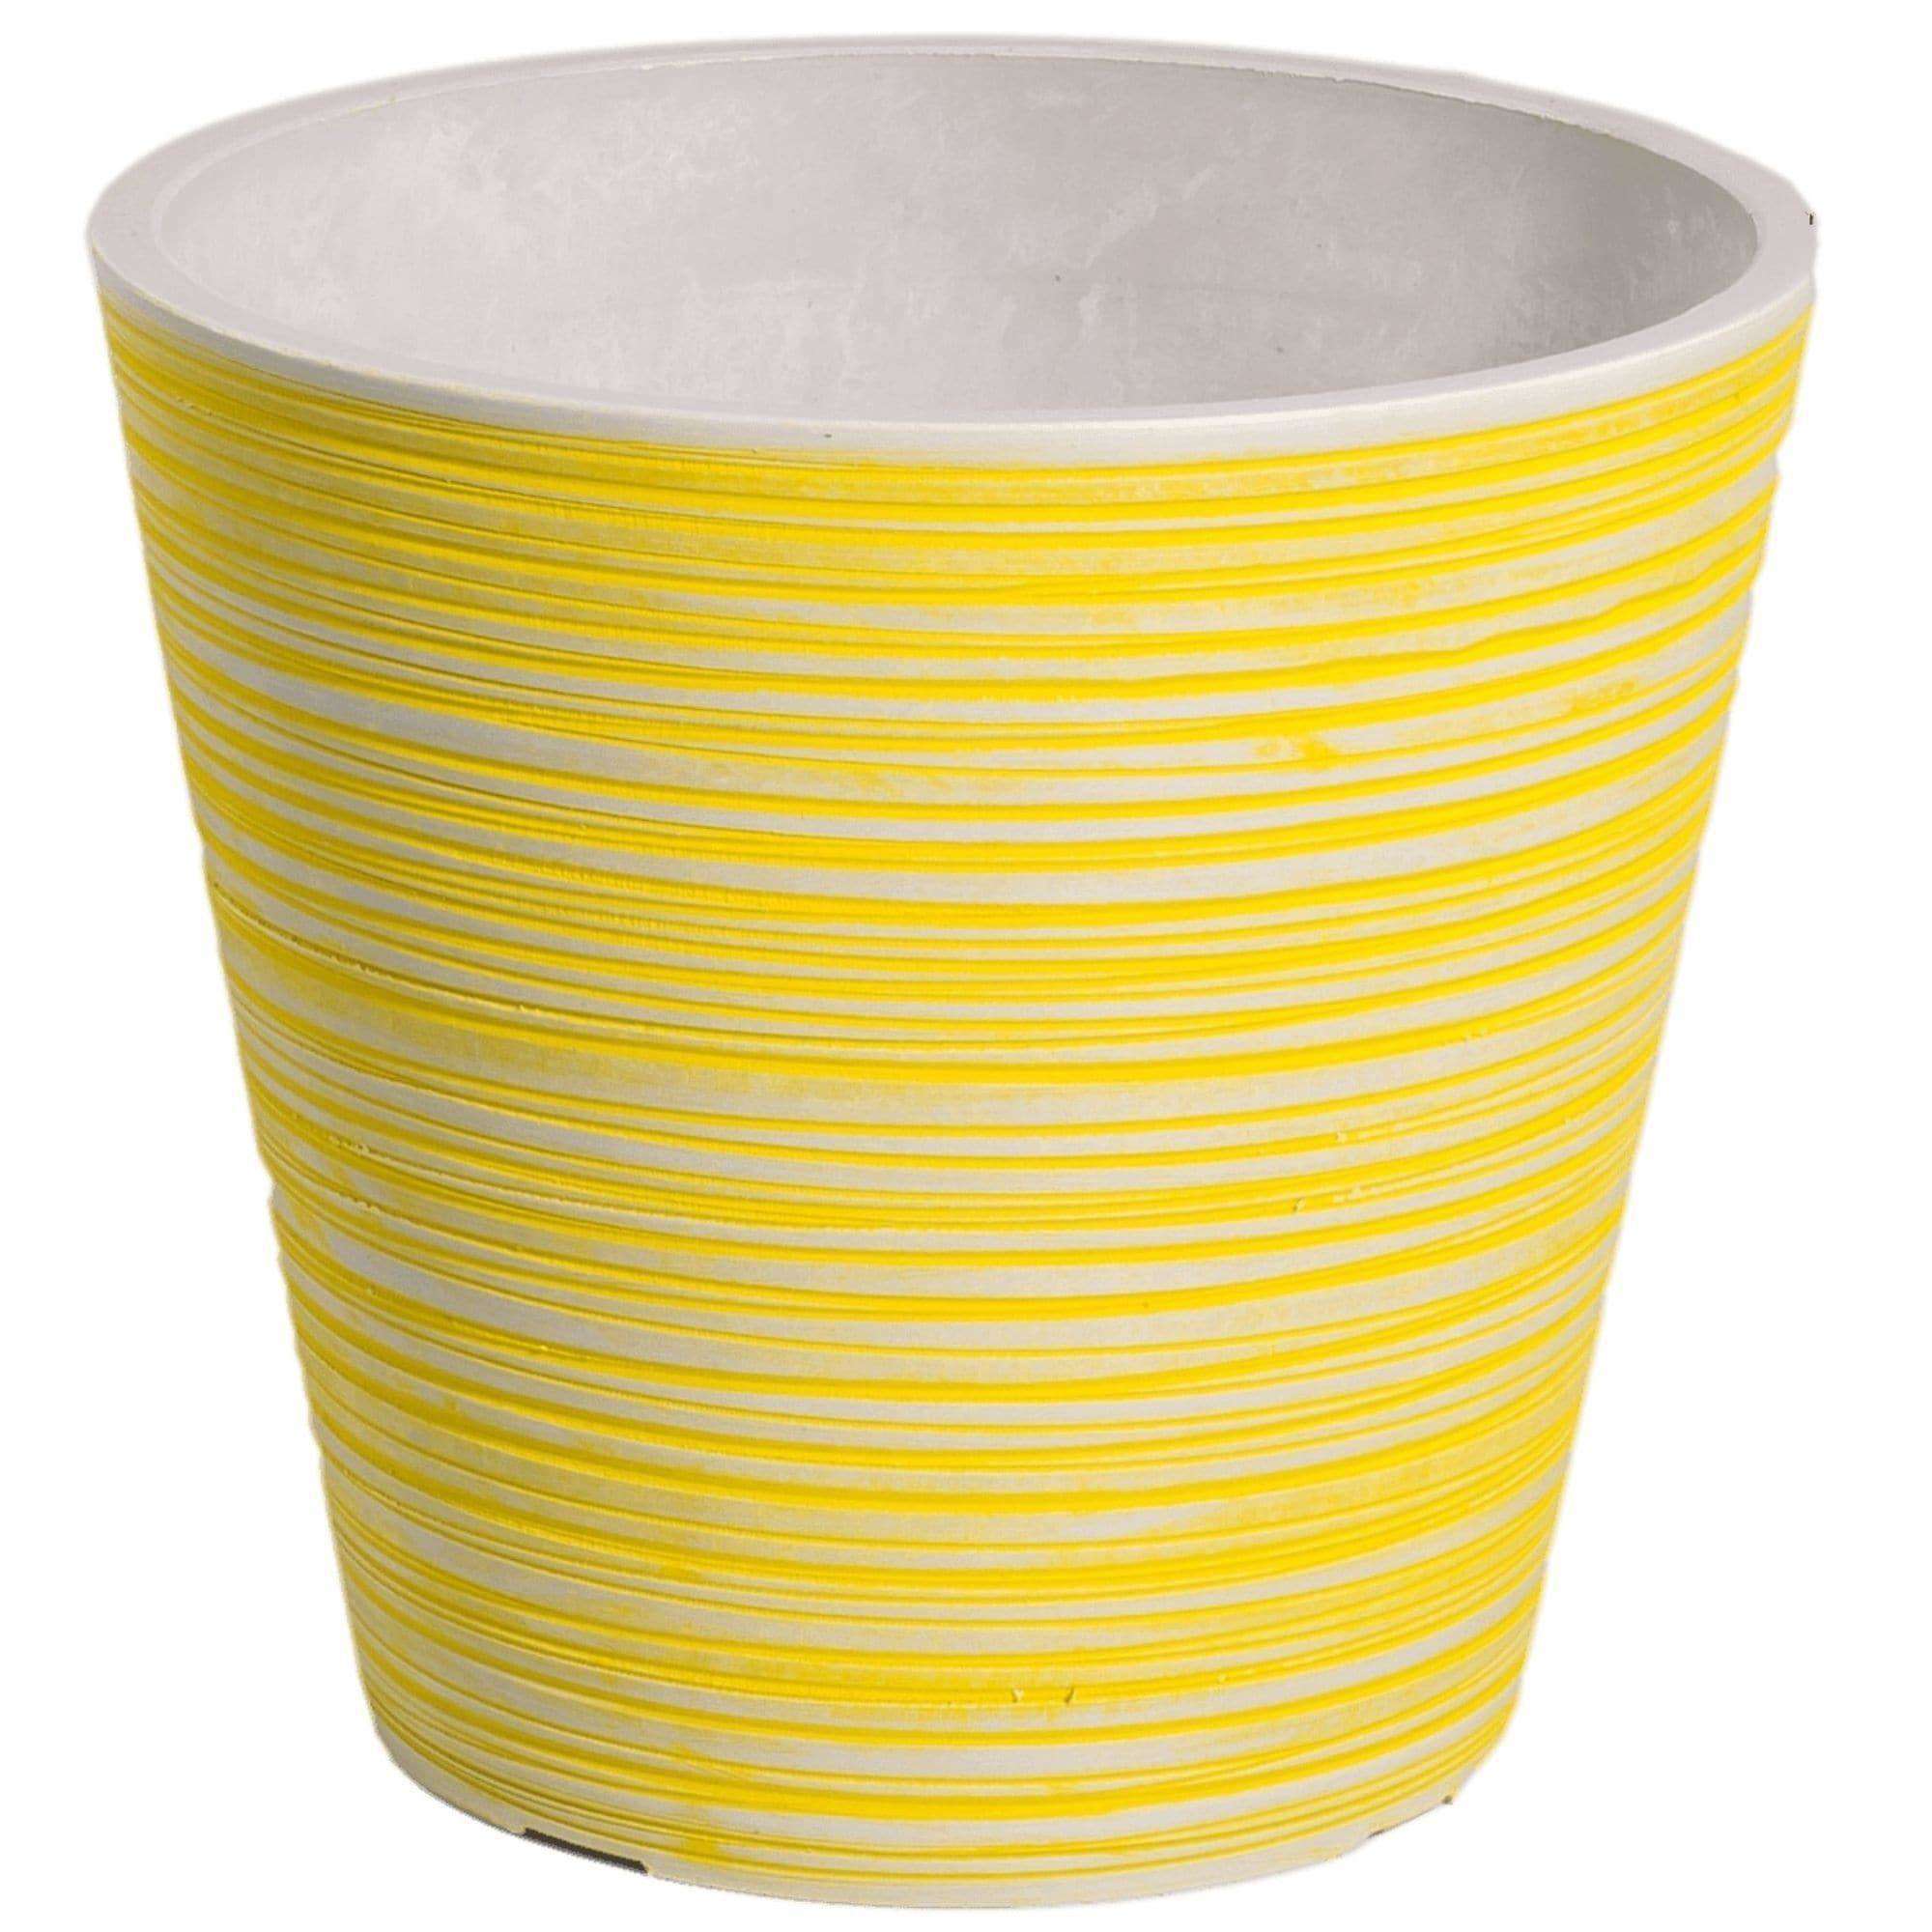 yellow-and-white-engraved-pot-14cm-559823.jpg